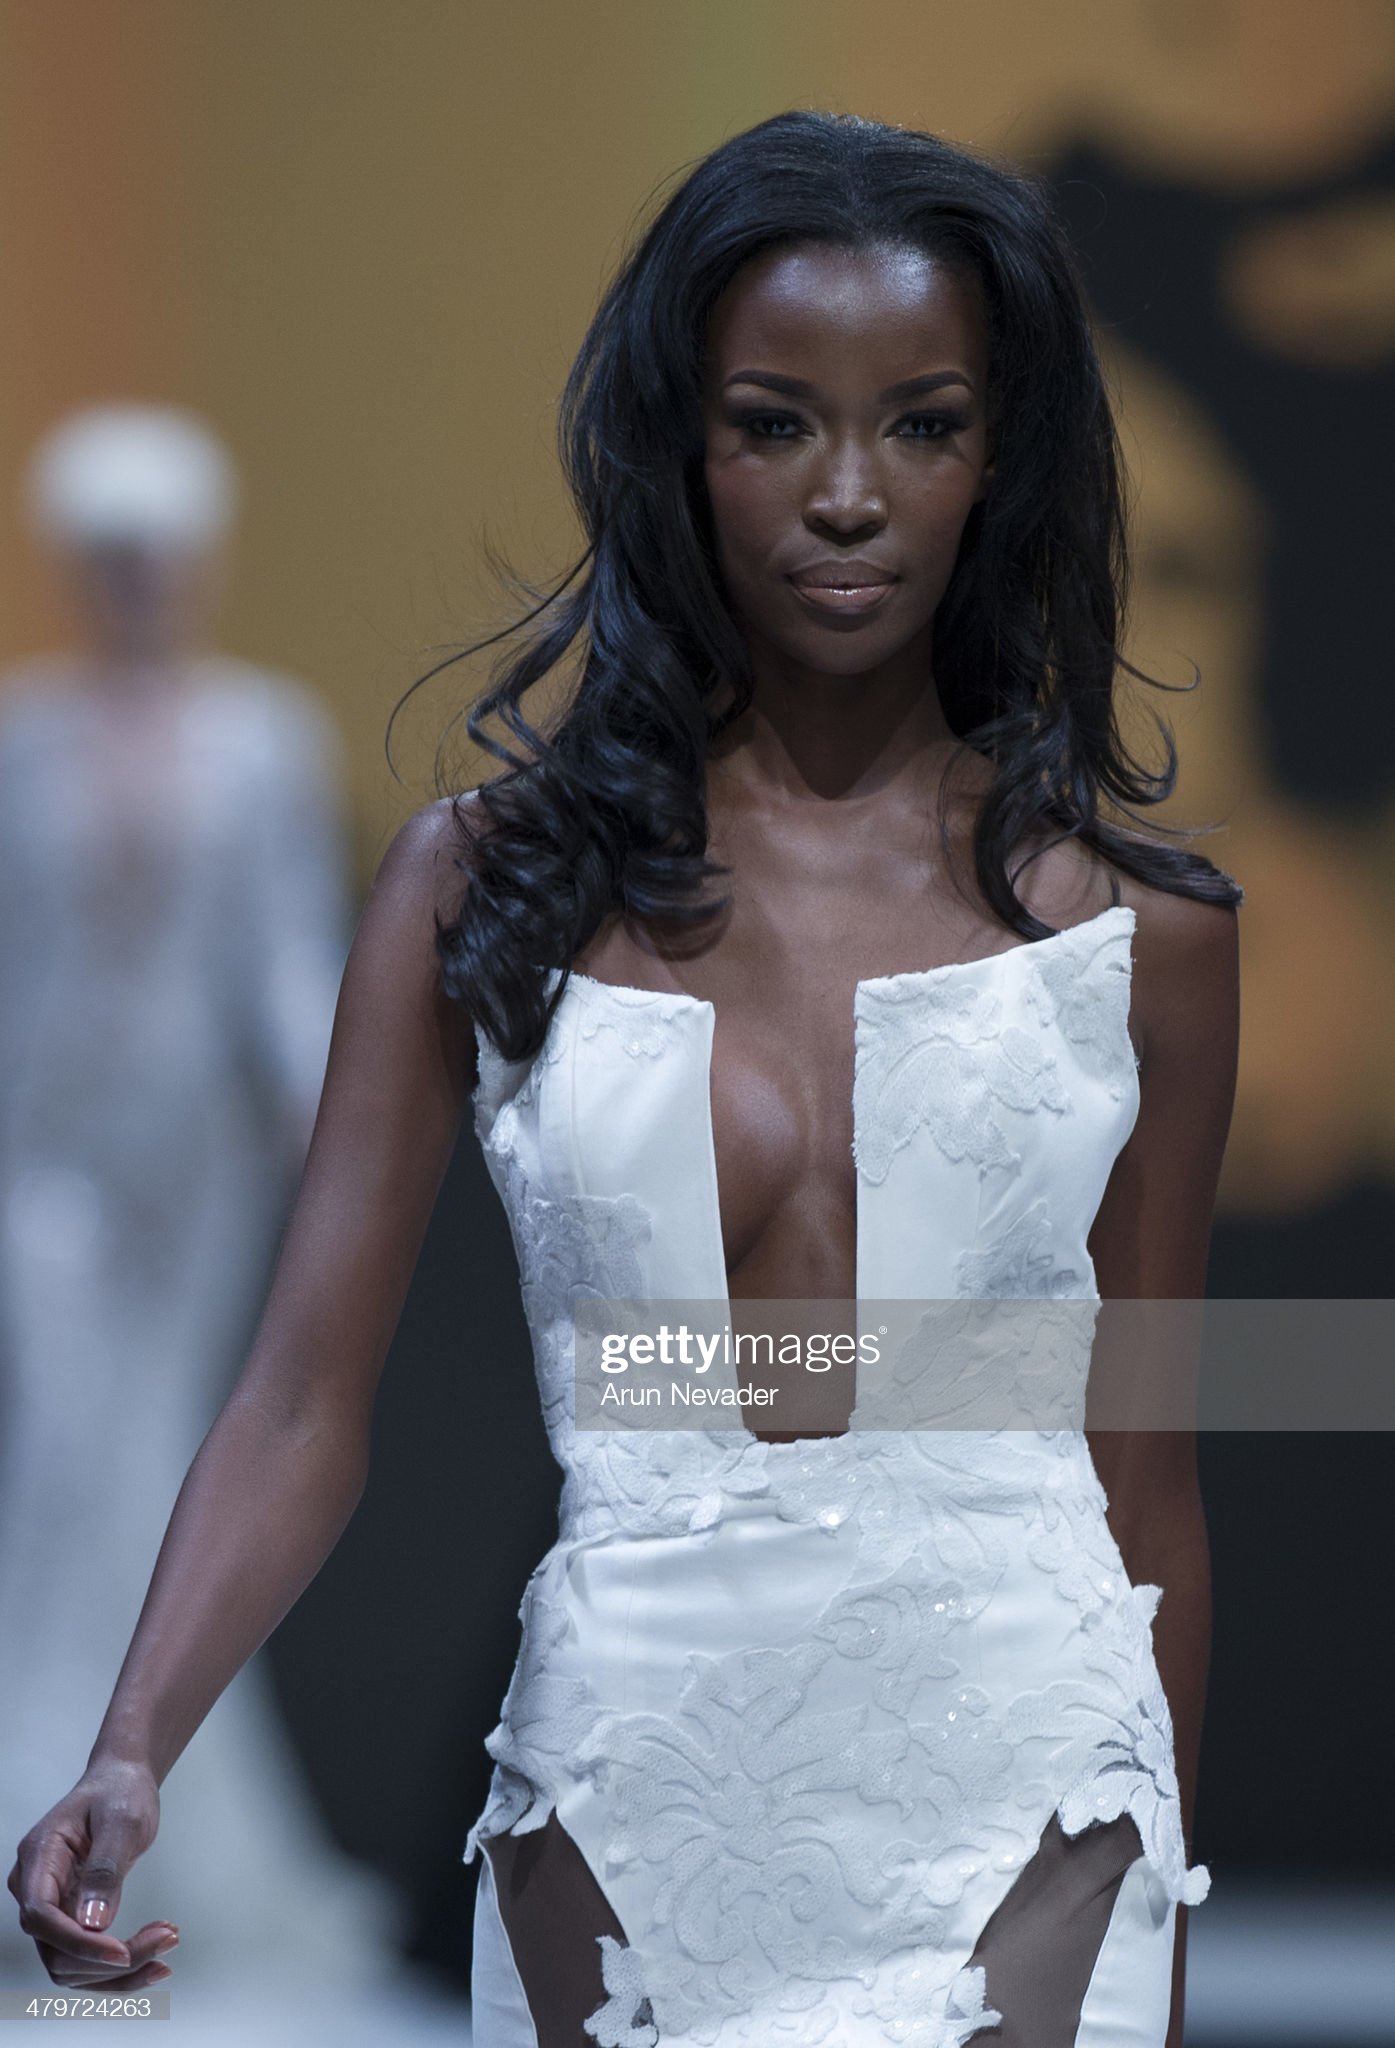 PALM DESERT, CA - MARCH 19:  Tia Shipman walks the runway for the Michael Costello Couture fashion show fall 2014 during Project Runway at El Paseo Fashion Week 2014 on March 19, 2014 in Palm Desert, California.  (Photo by Arun Nevader/WireImage)